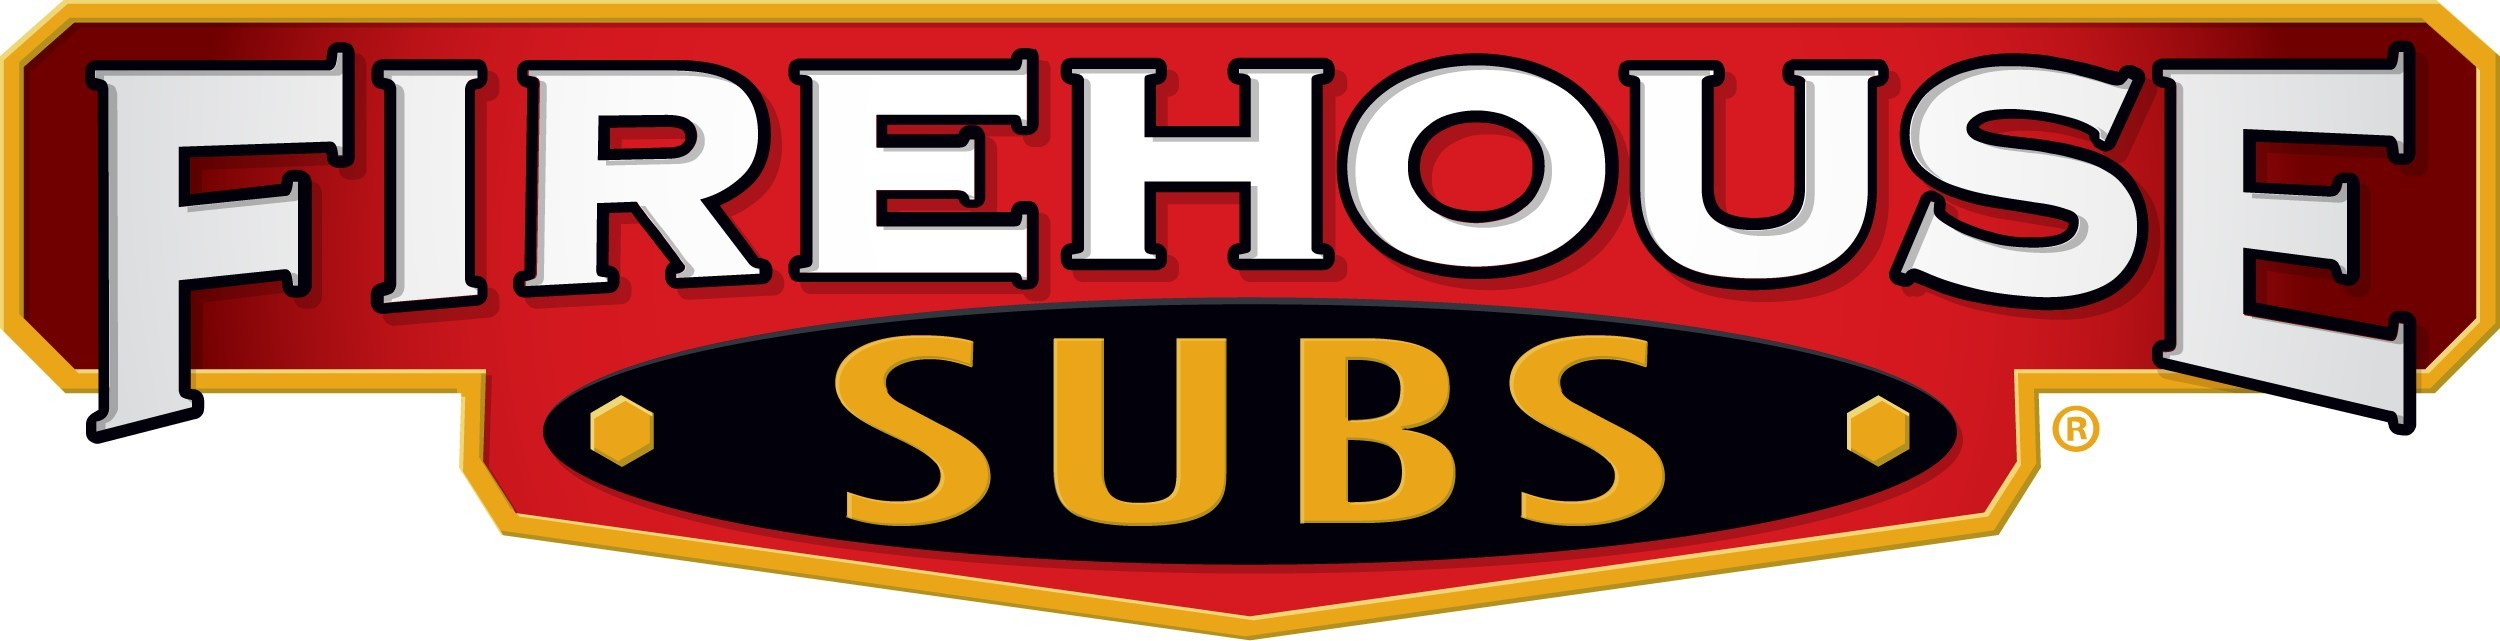 FIREHOUSE SUBS - HALF-OFF your ENTIRE ORDER after 6pm when you order on the Firehouse Subs app or online ONLY! Expires 6/13!